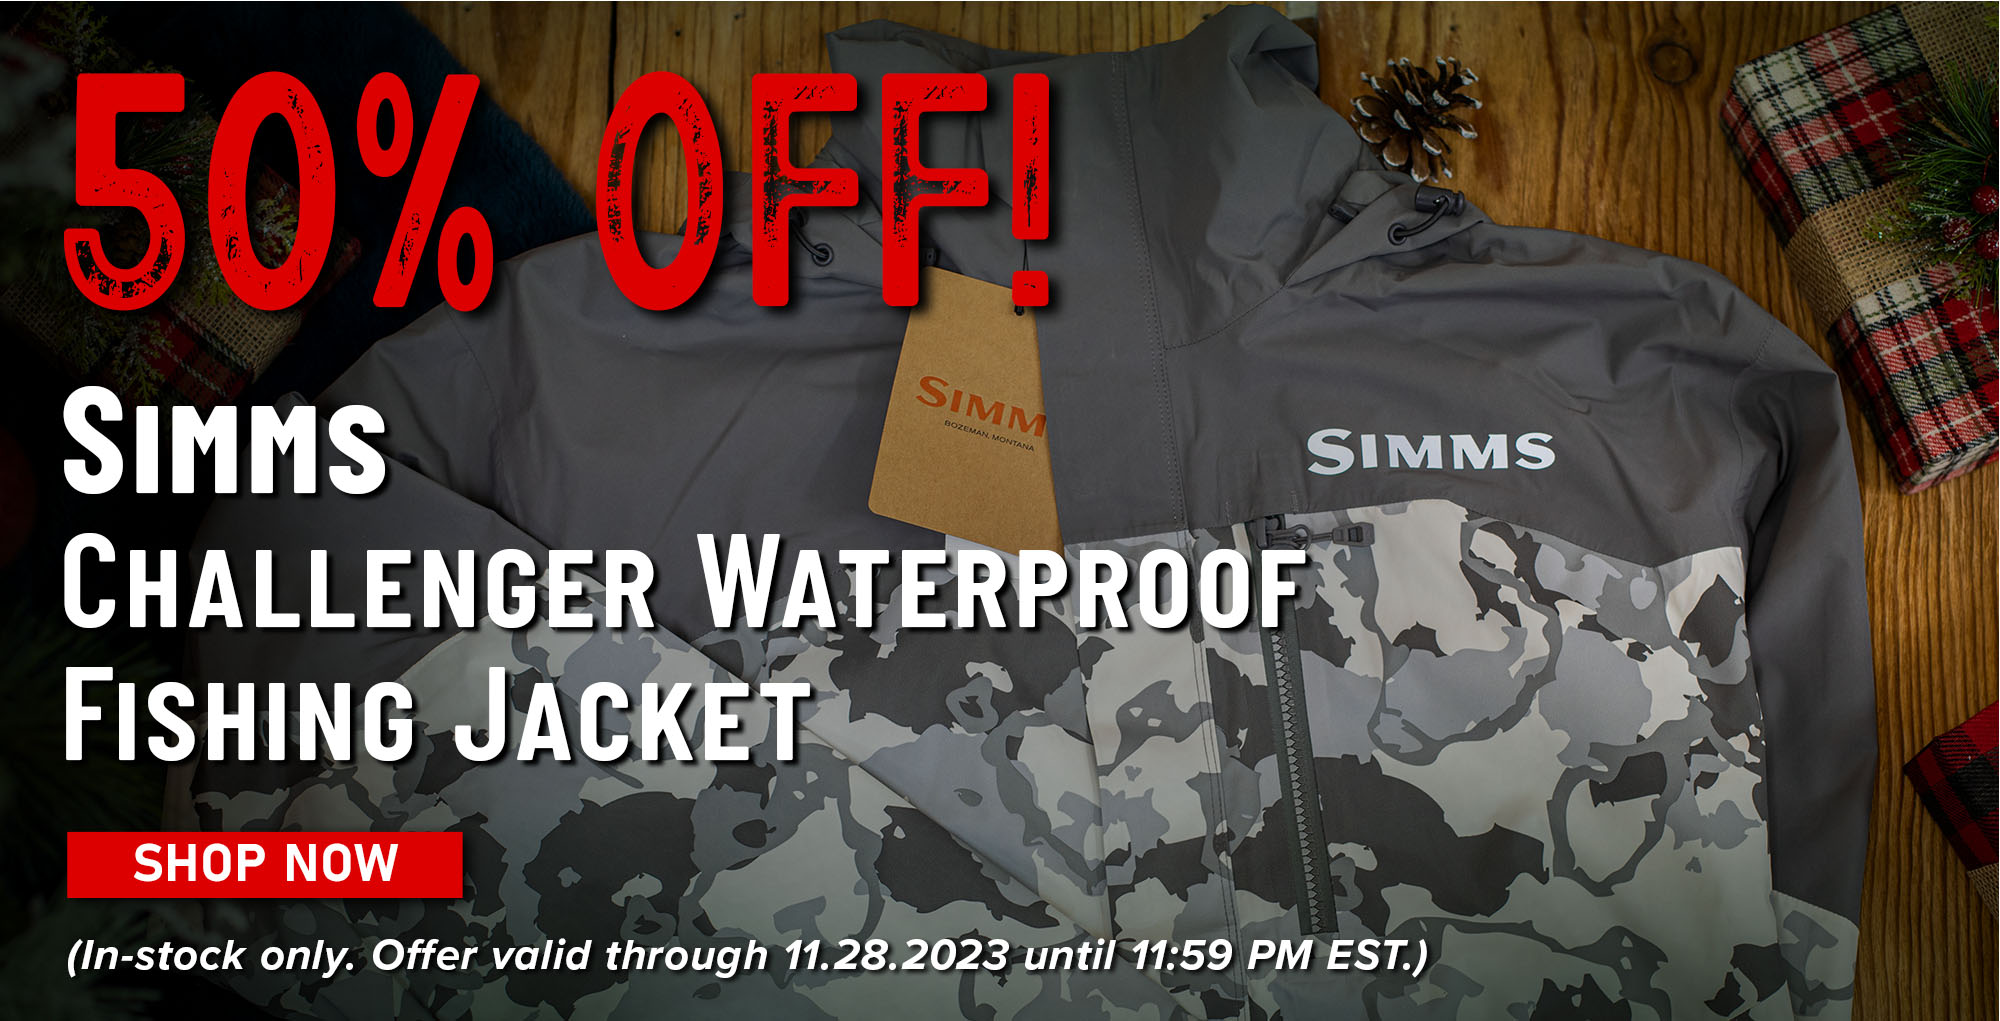 50% Off! Simms Challenger Waterproof Fishing Jacket Shop Now (In-stock only. Offer valid through 11.28.2023 until 11:59 PM EST.)